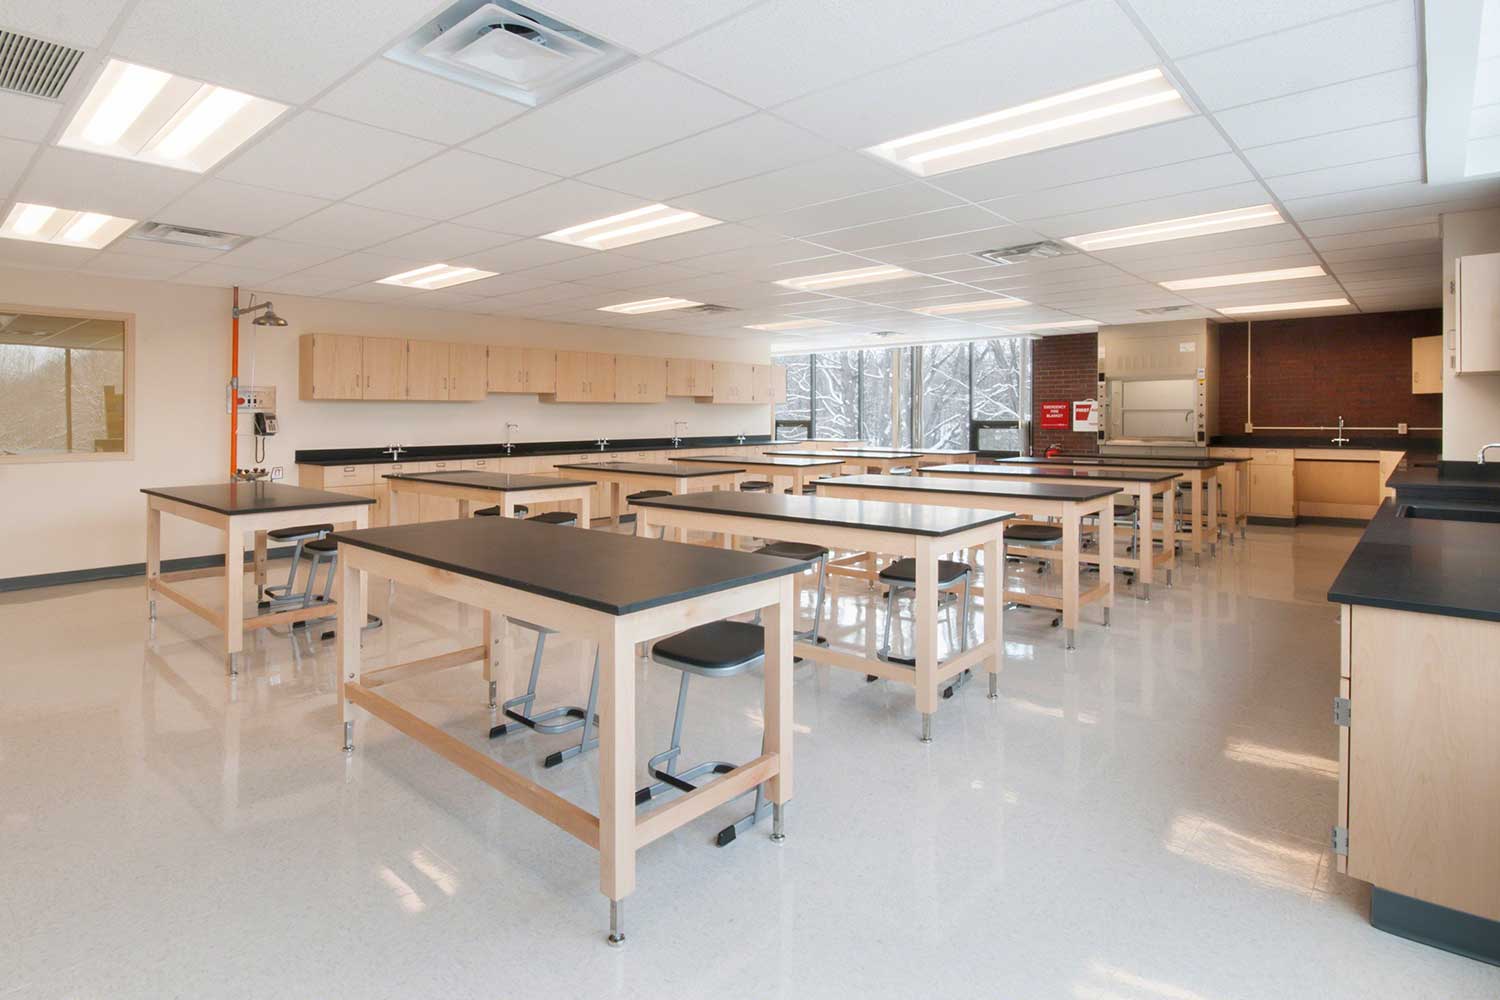 Commercial Tables classroom tables Commercial Casework and Cabinets